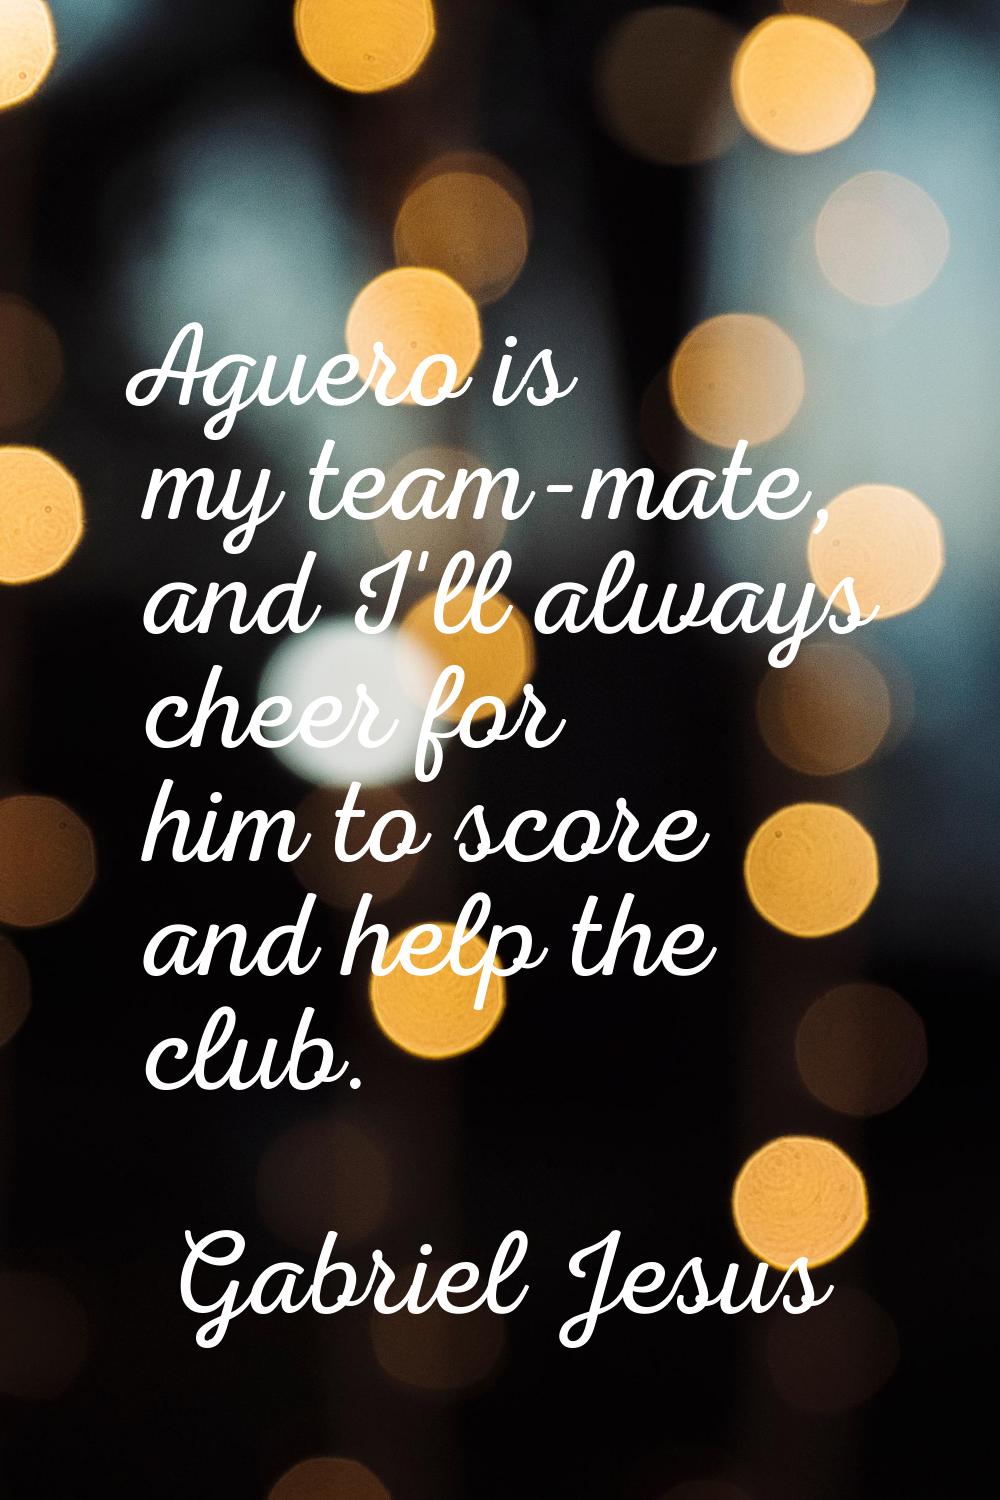 Aguero is my team-mate, and I'll always cheer for him to score and help the club.